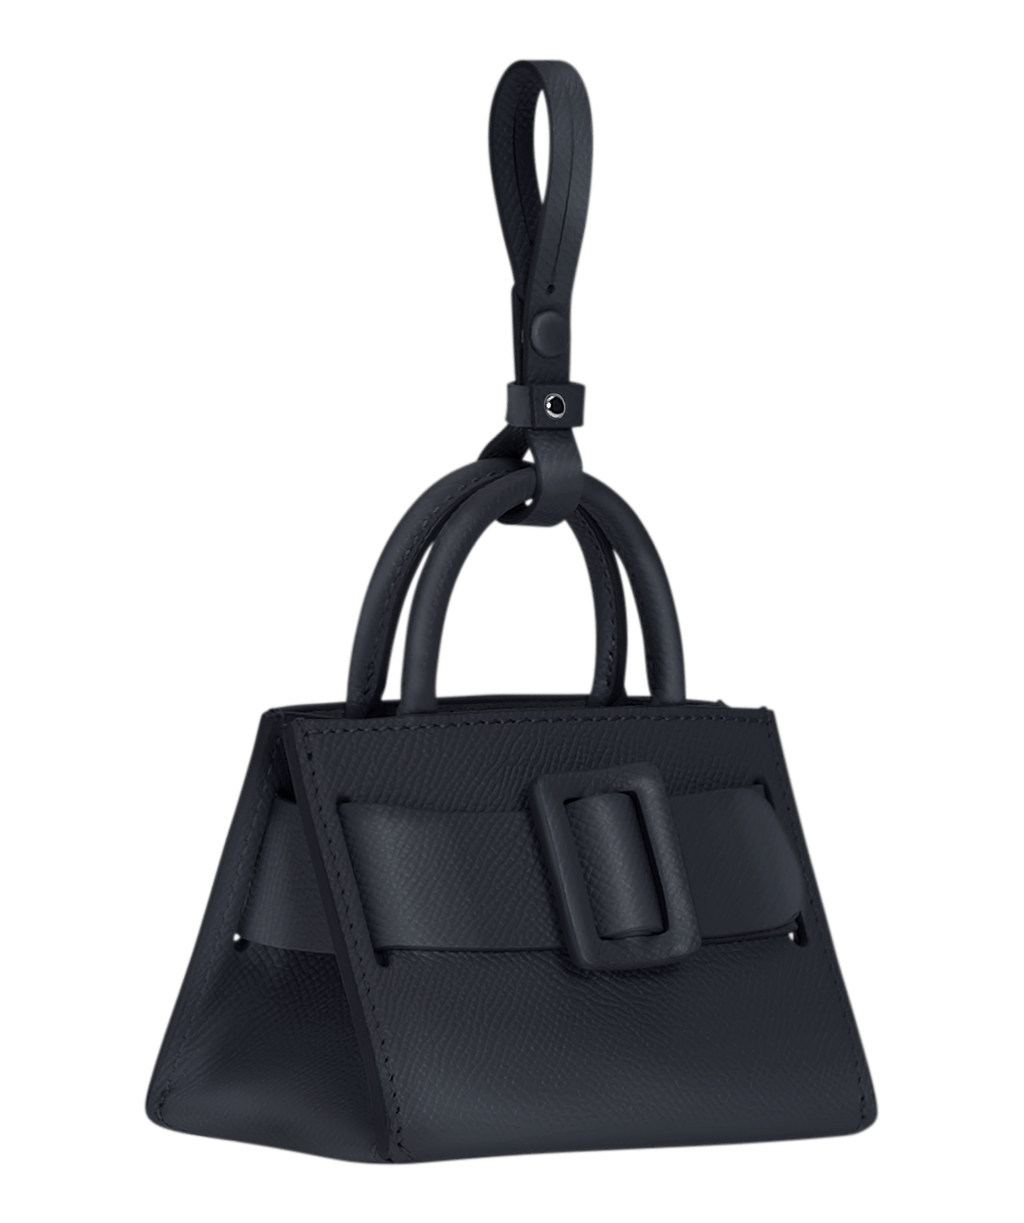 Miniature structured blue handbag charm with a leather buckle on the front, carry strap, and twin handles. Made with grained calfskin leather.